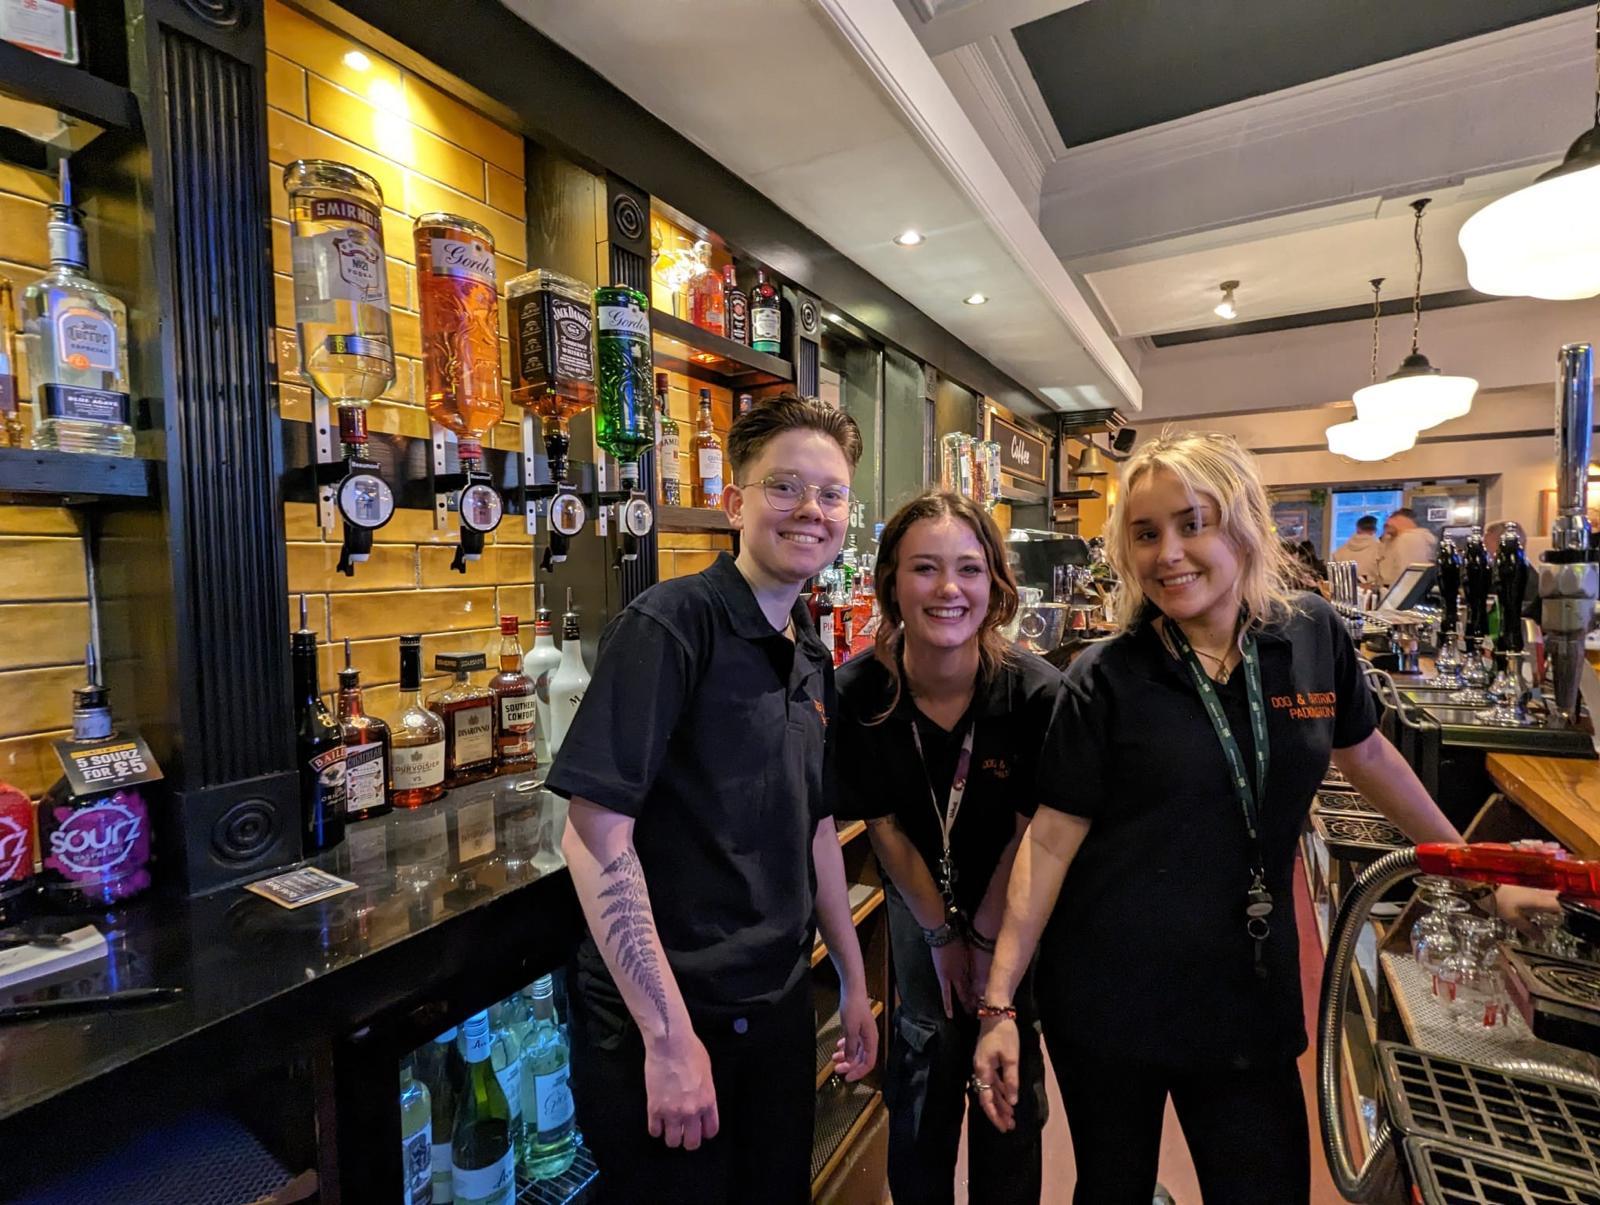 Bar staff welcomed customers back to the venue